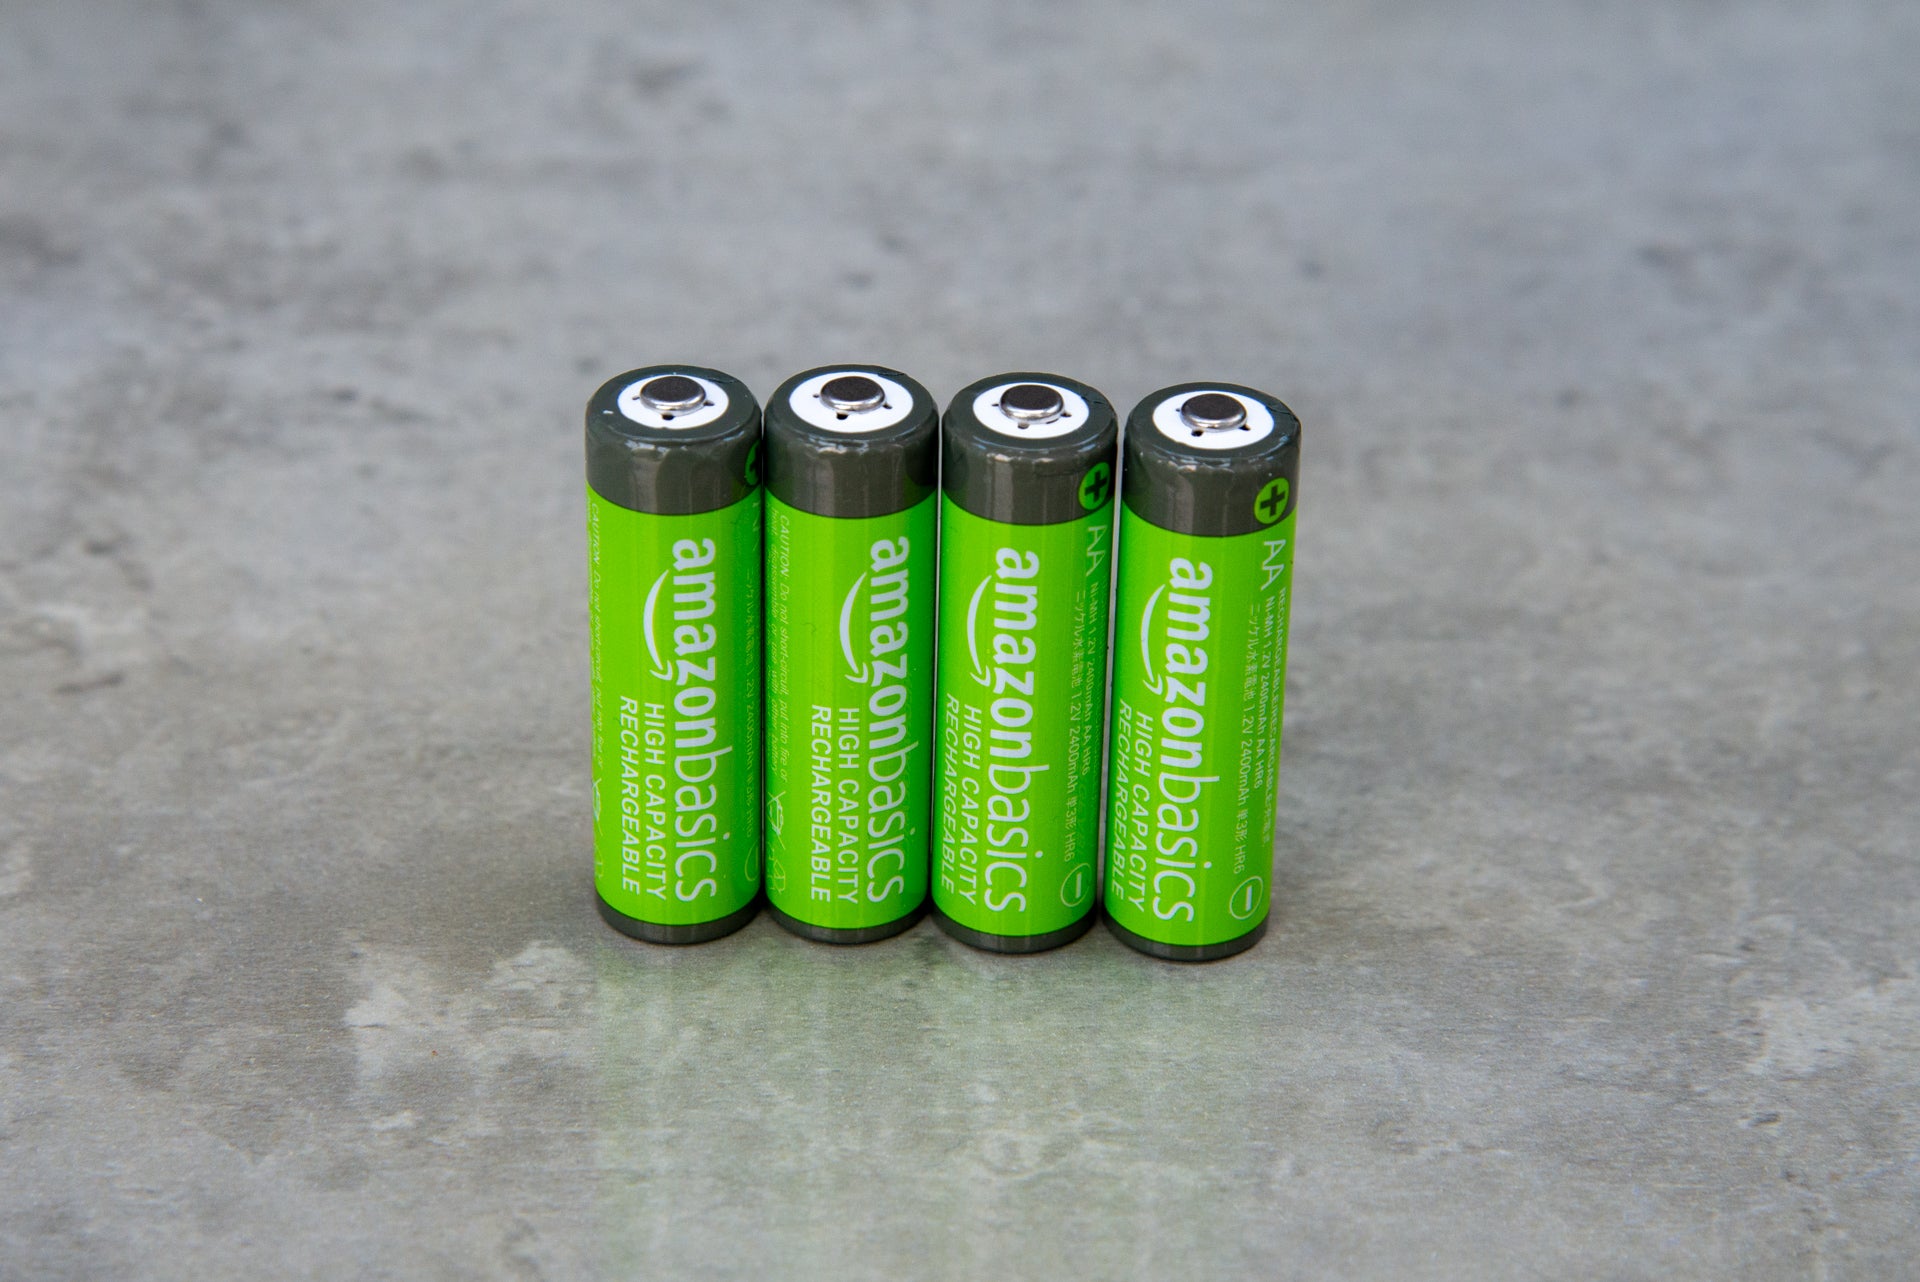 Basics High Capacity Rechargeable AA 2400mAh review: Great value